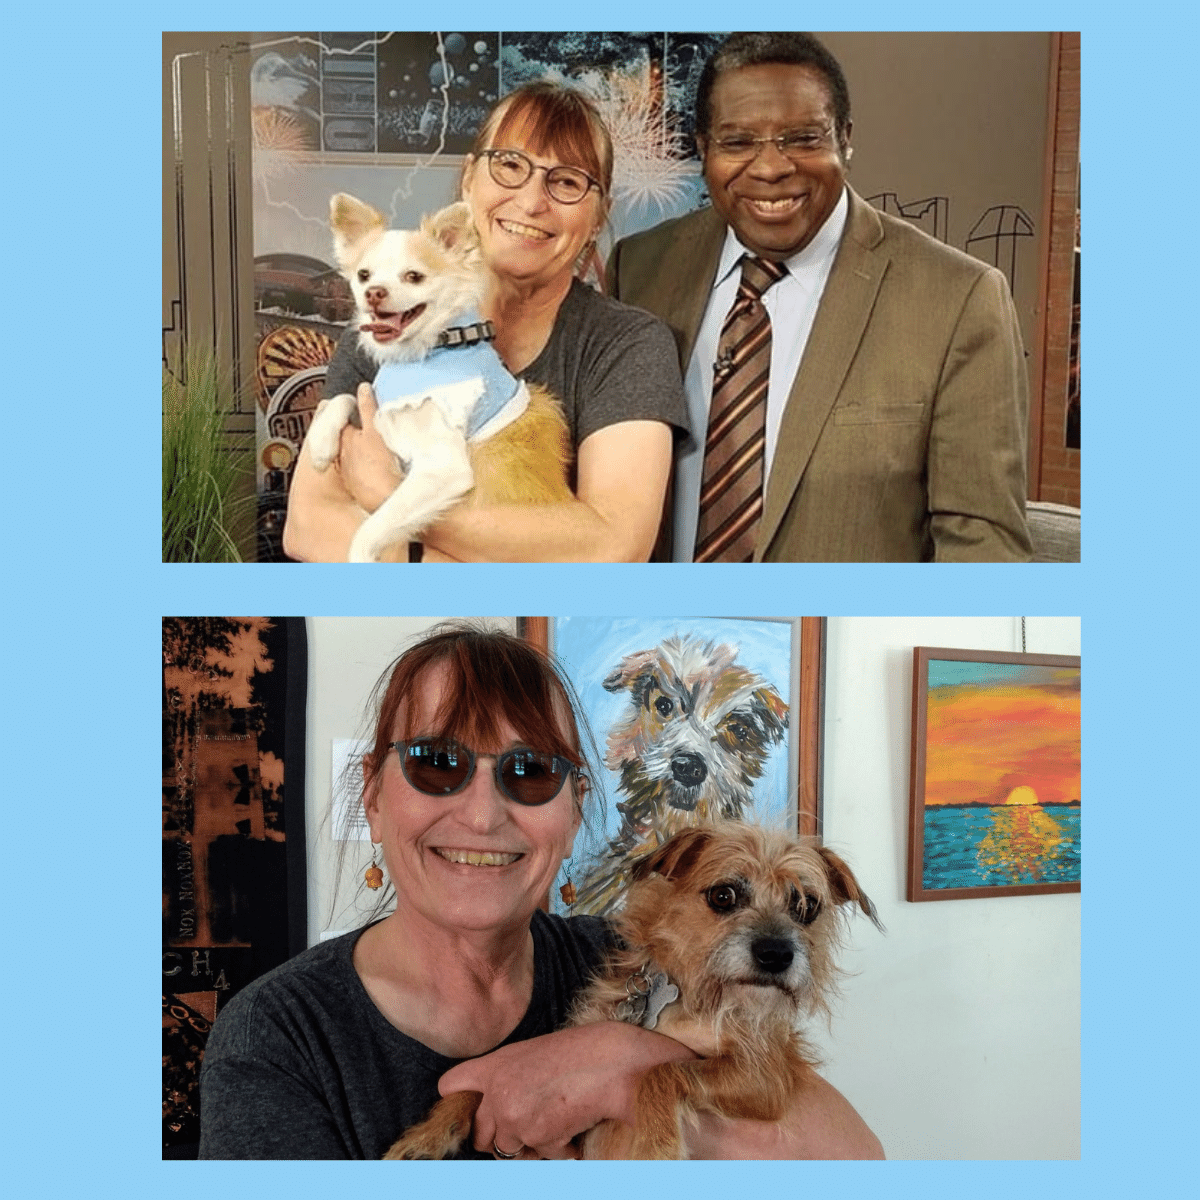 Nancy showing her art of her dog and showing her dog to a local newsman.